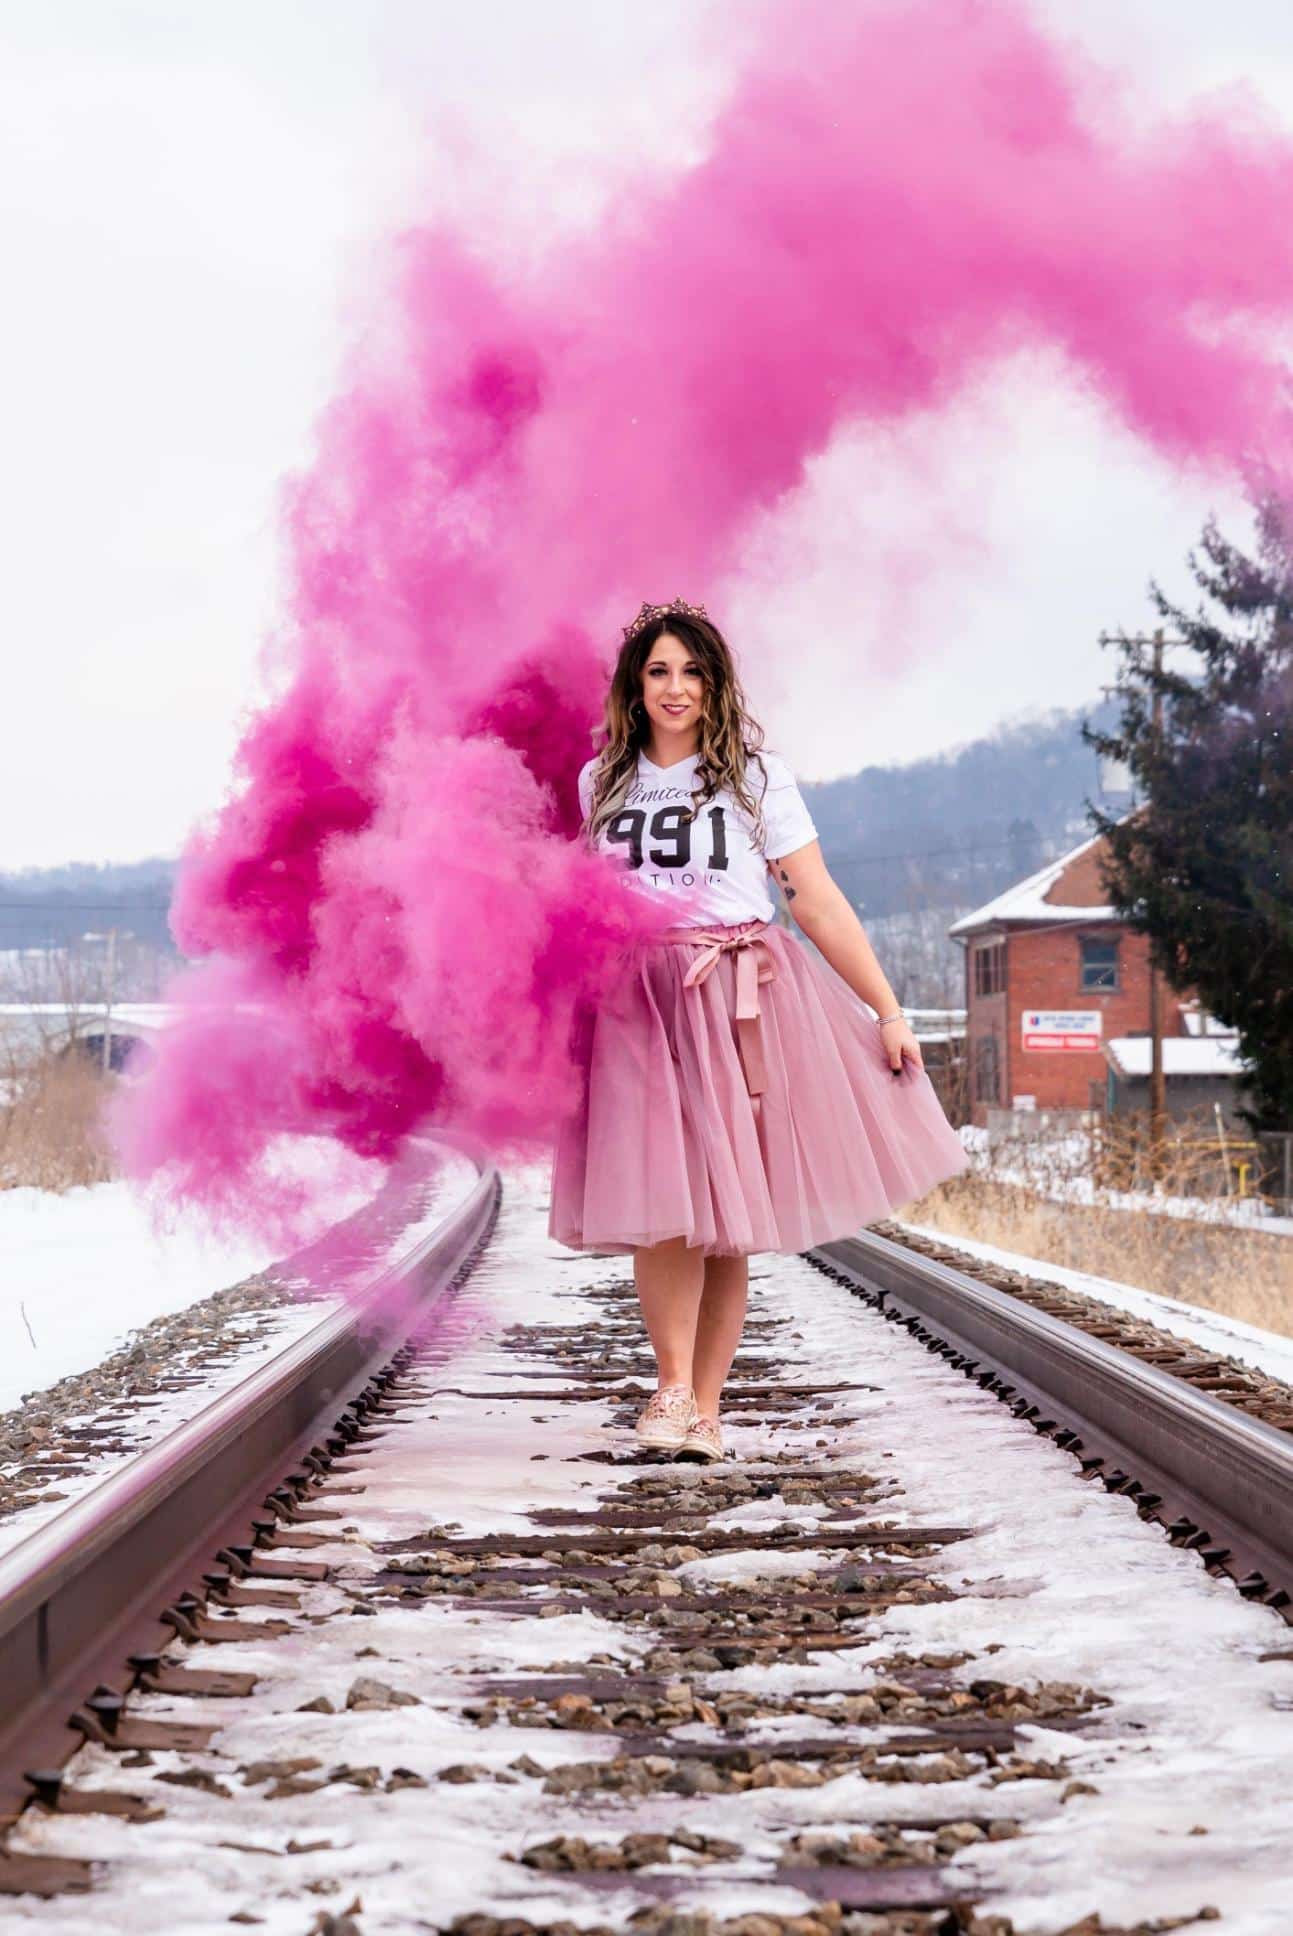 Birthday Photoshoot Idea with Colored Pink Smoke